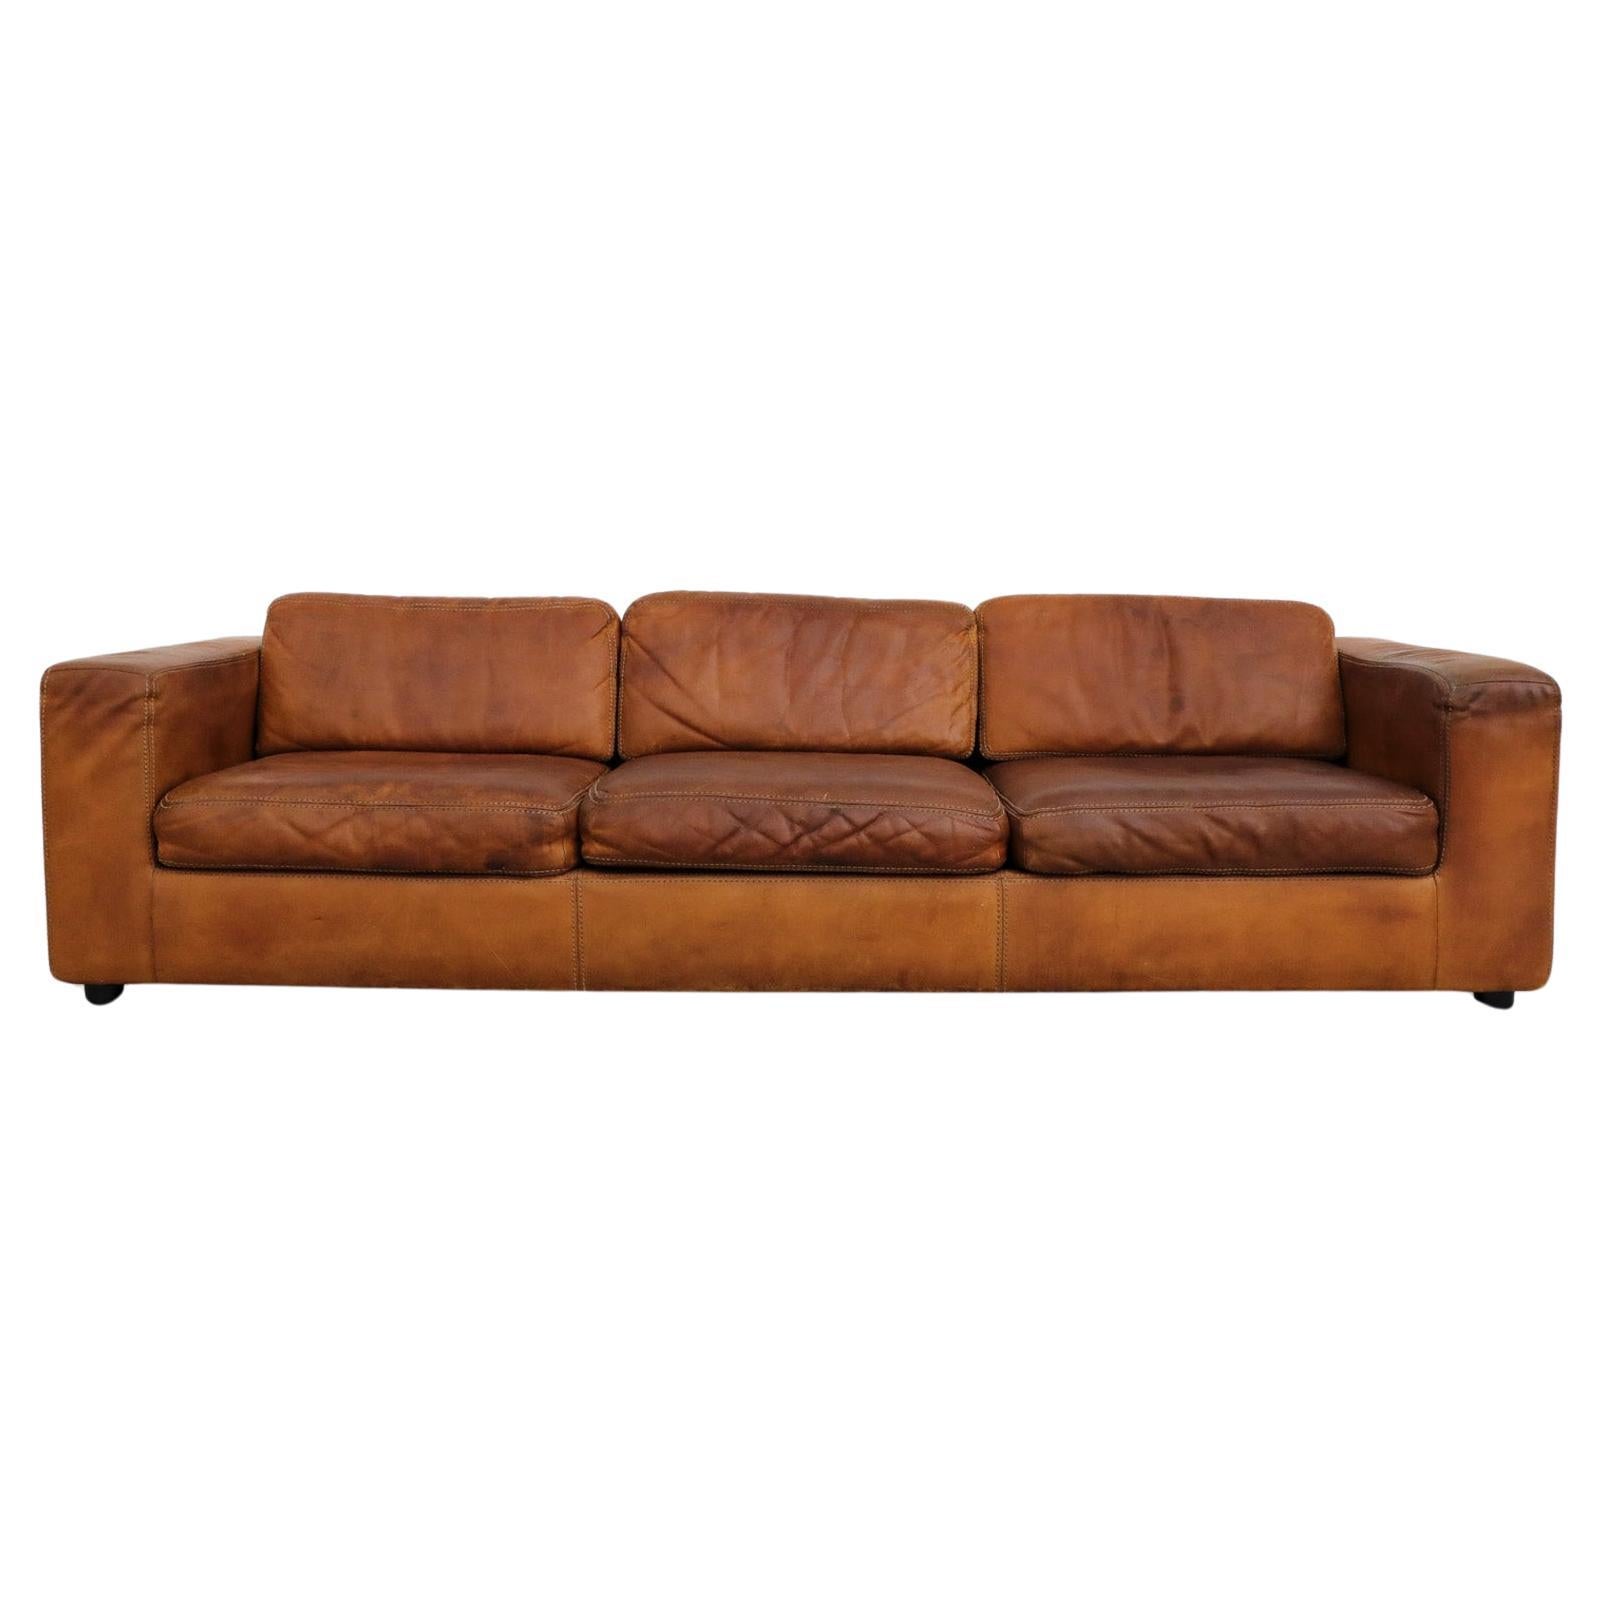 Mid-Century Cognac Buffalo Leather Durlet Three Seater Sofa For Sale